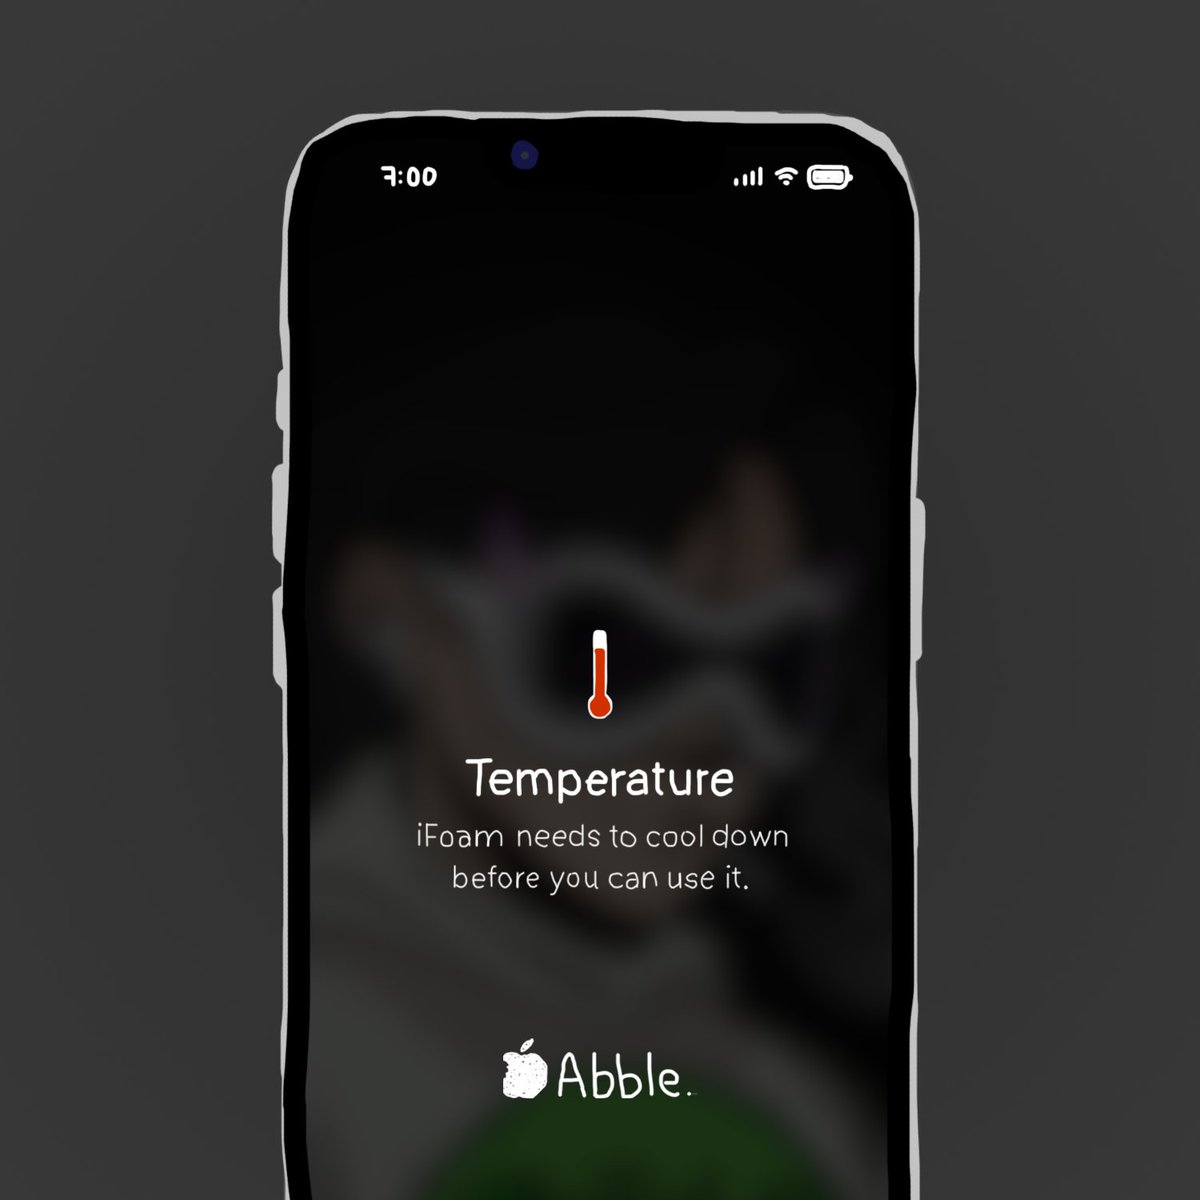 Your $AABL device needs to cool down 🧊🥵